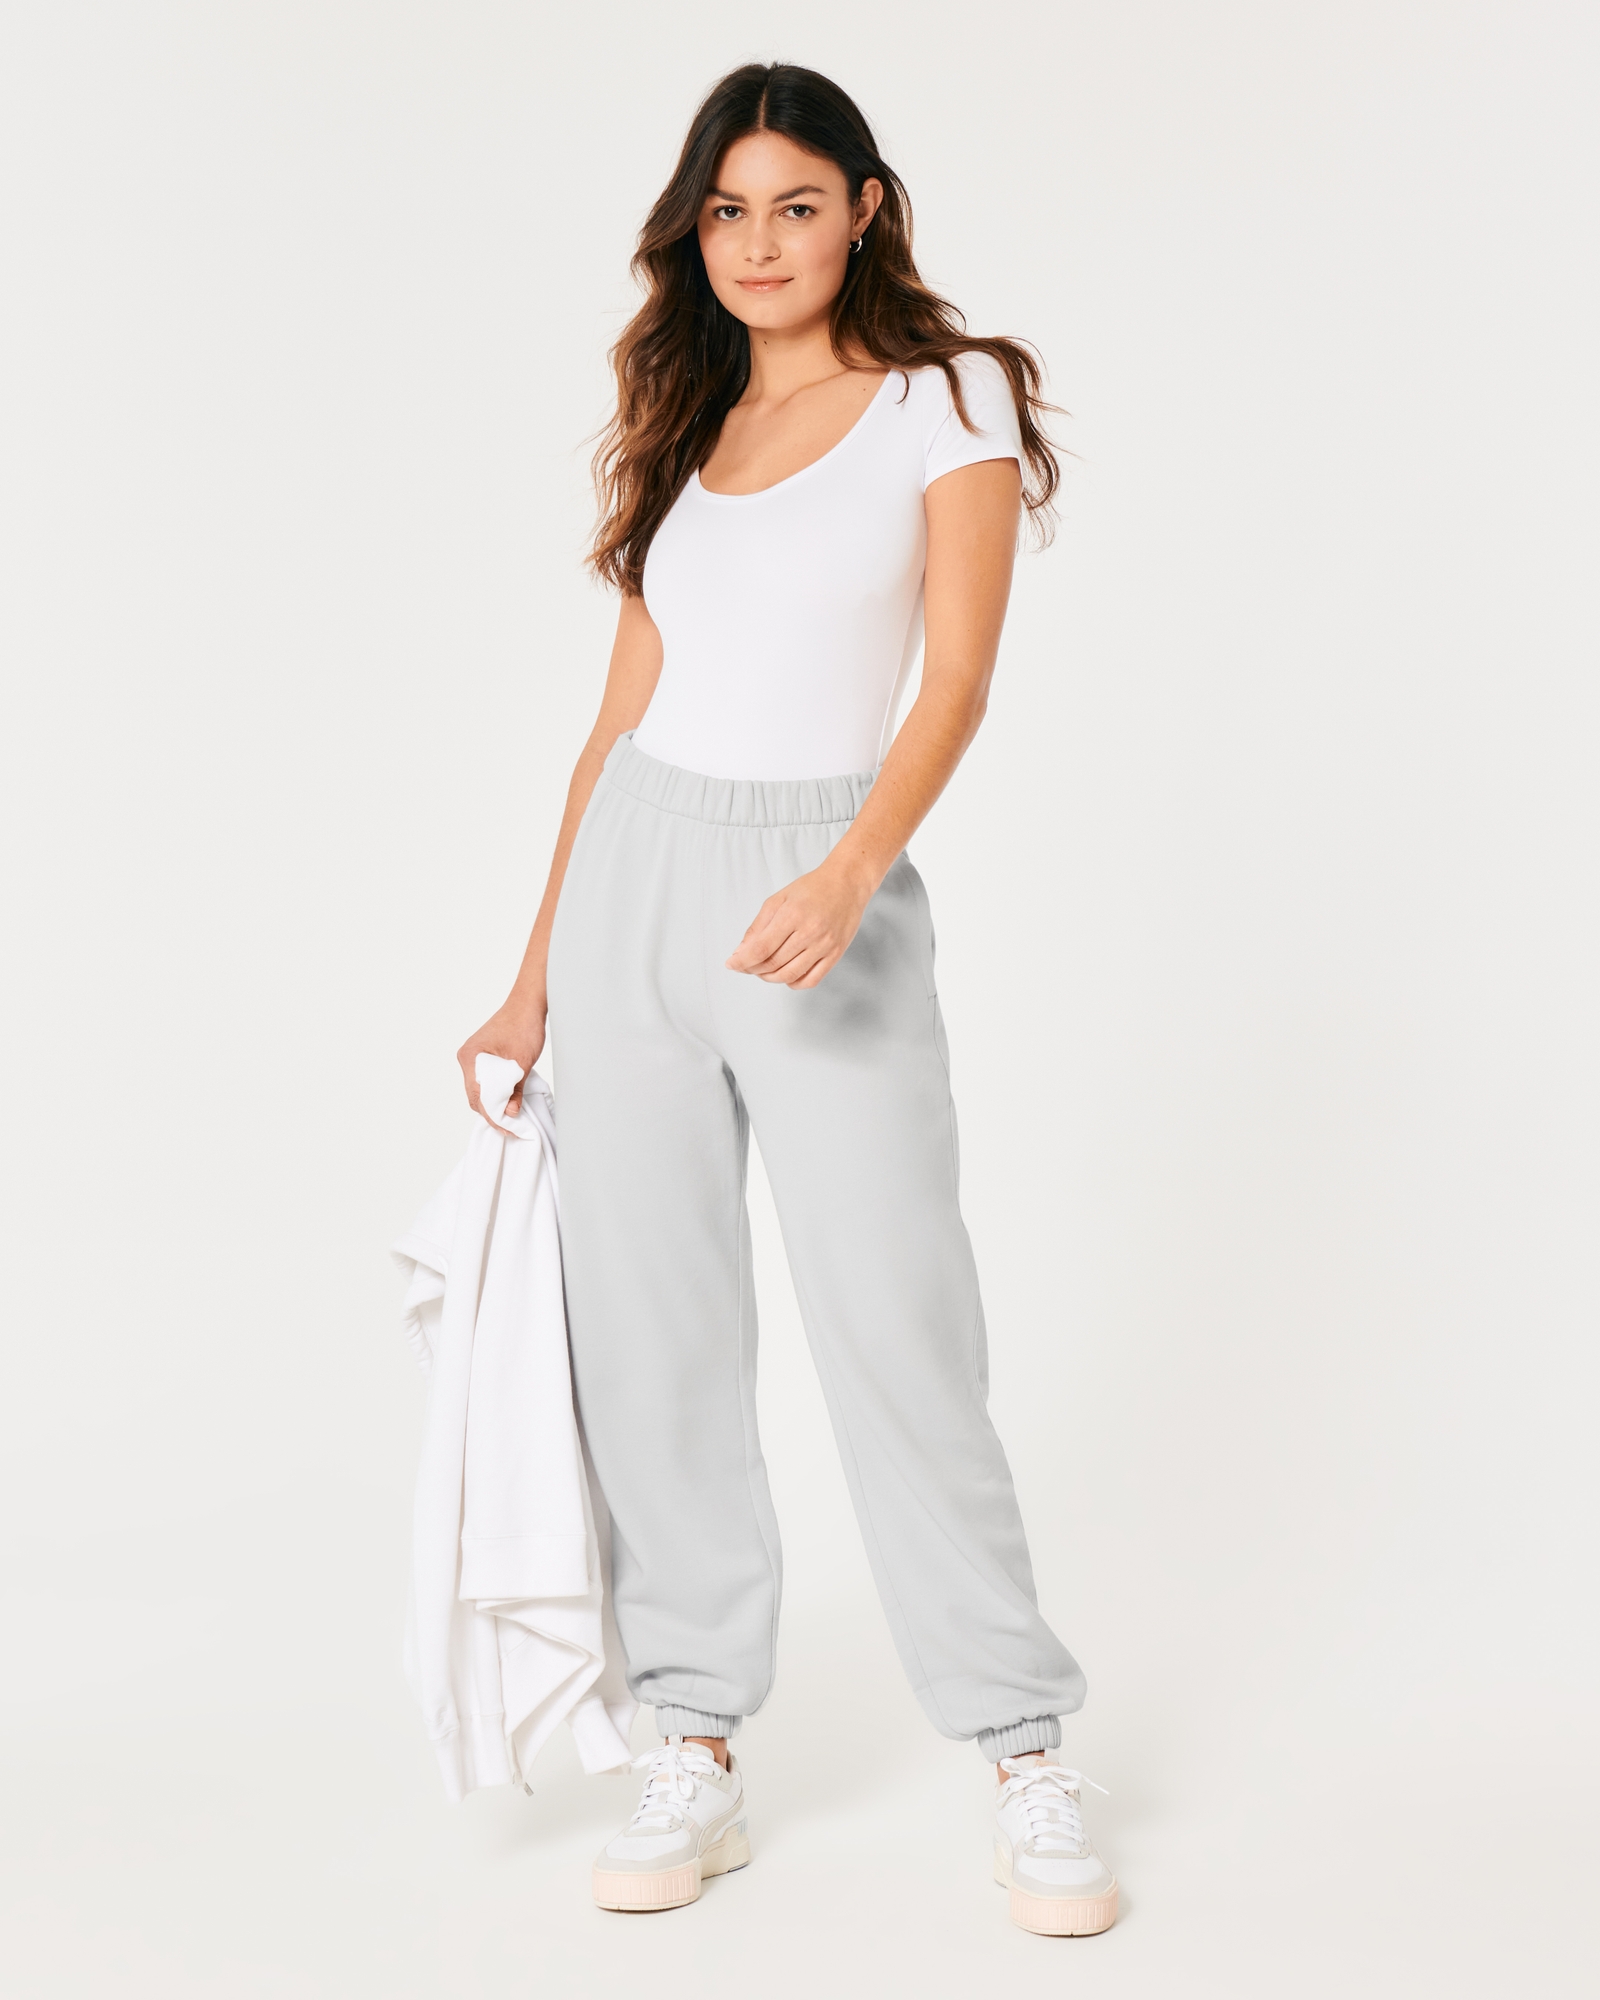  Hollister California Women's Ultra High-Rise Fleece Dad Joggers  Pants How-2 (X-Small, 0812-501) : Clothing, Shoes & Jewelry